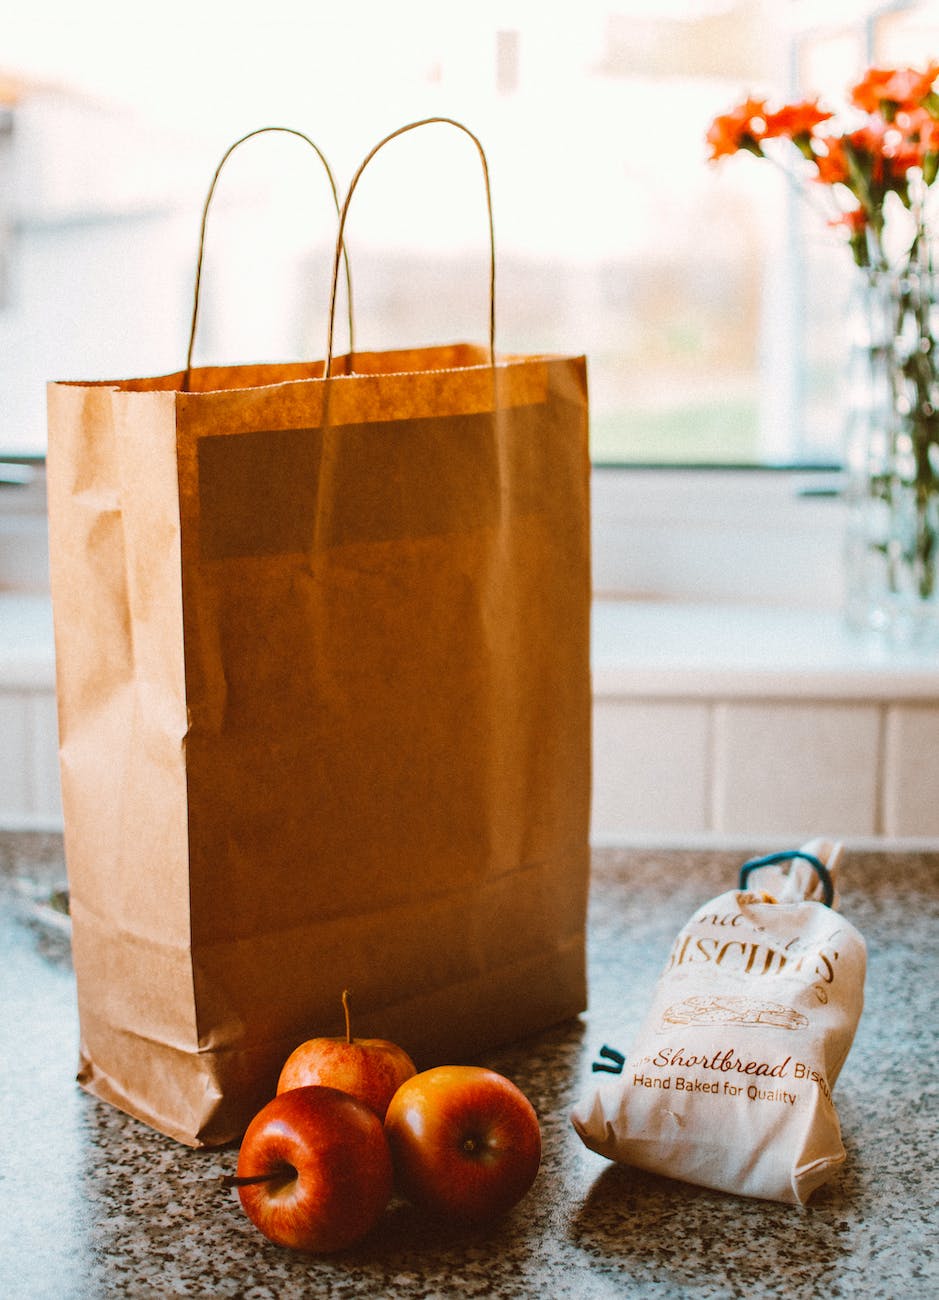 several apples beside bread pack and brown paper bag